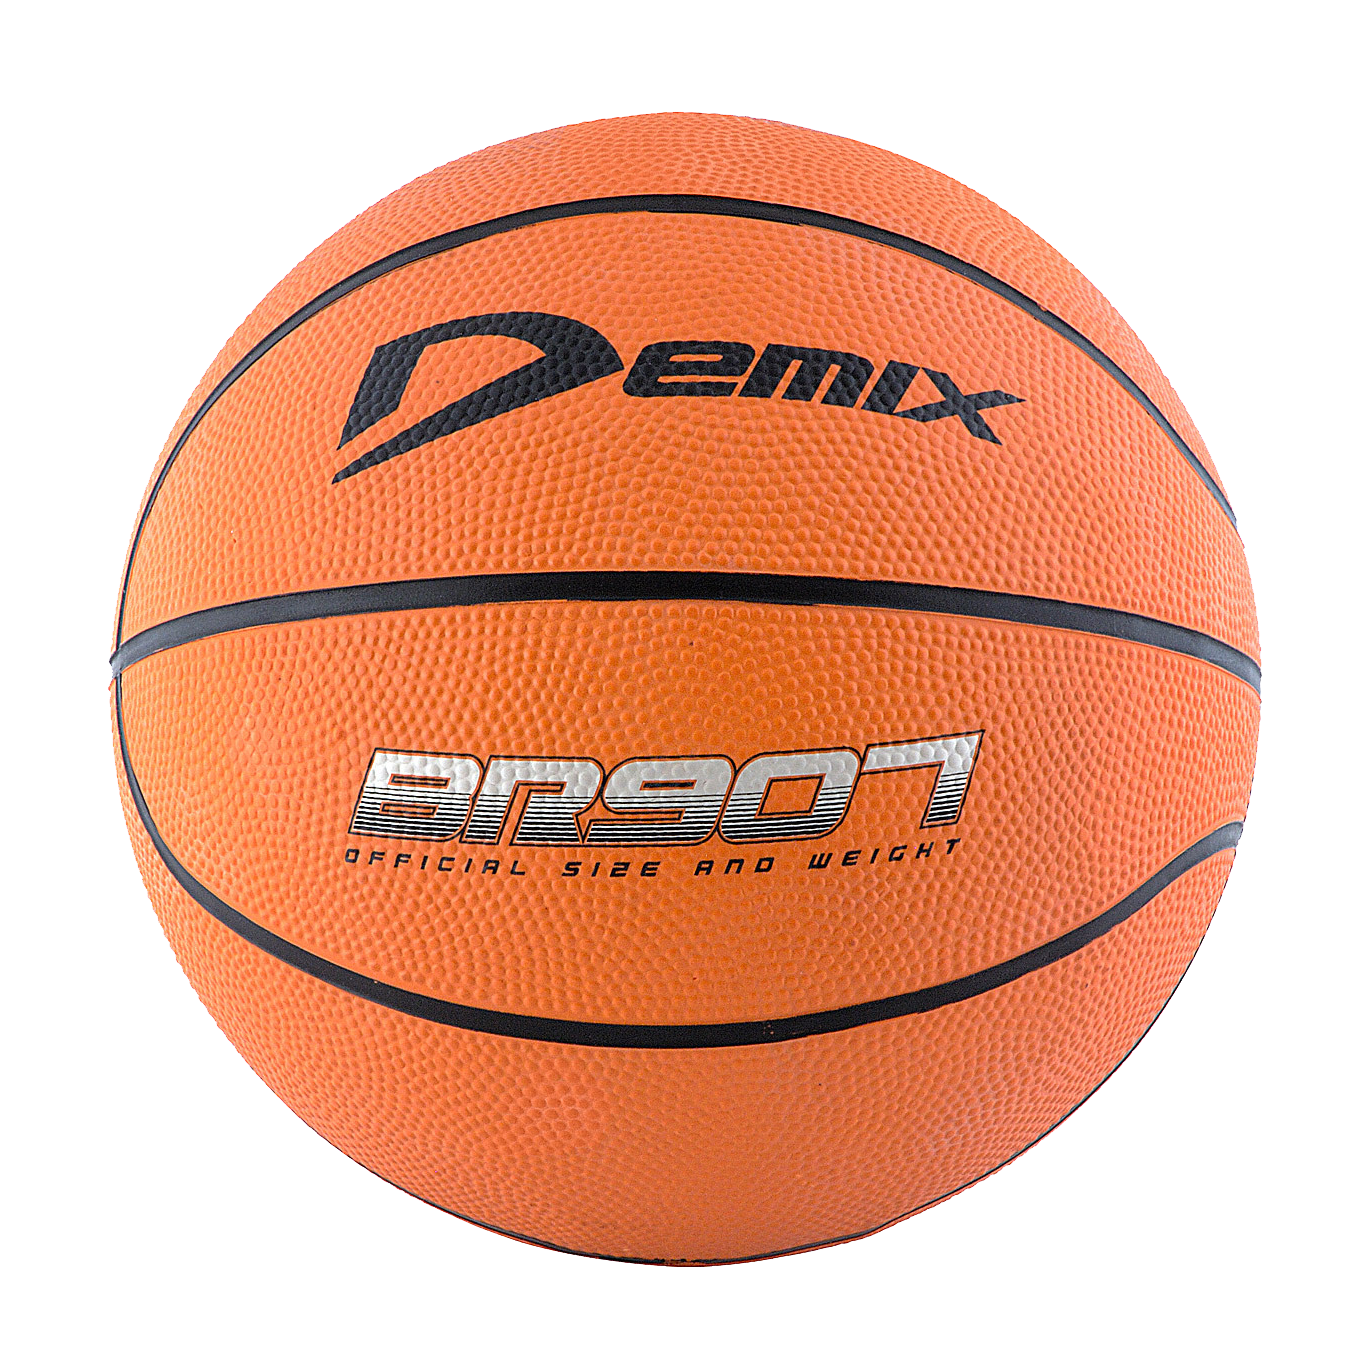 Basketball Ball PNG Image in Transparent - Basketball Png